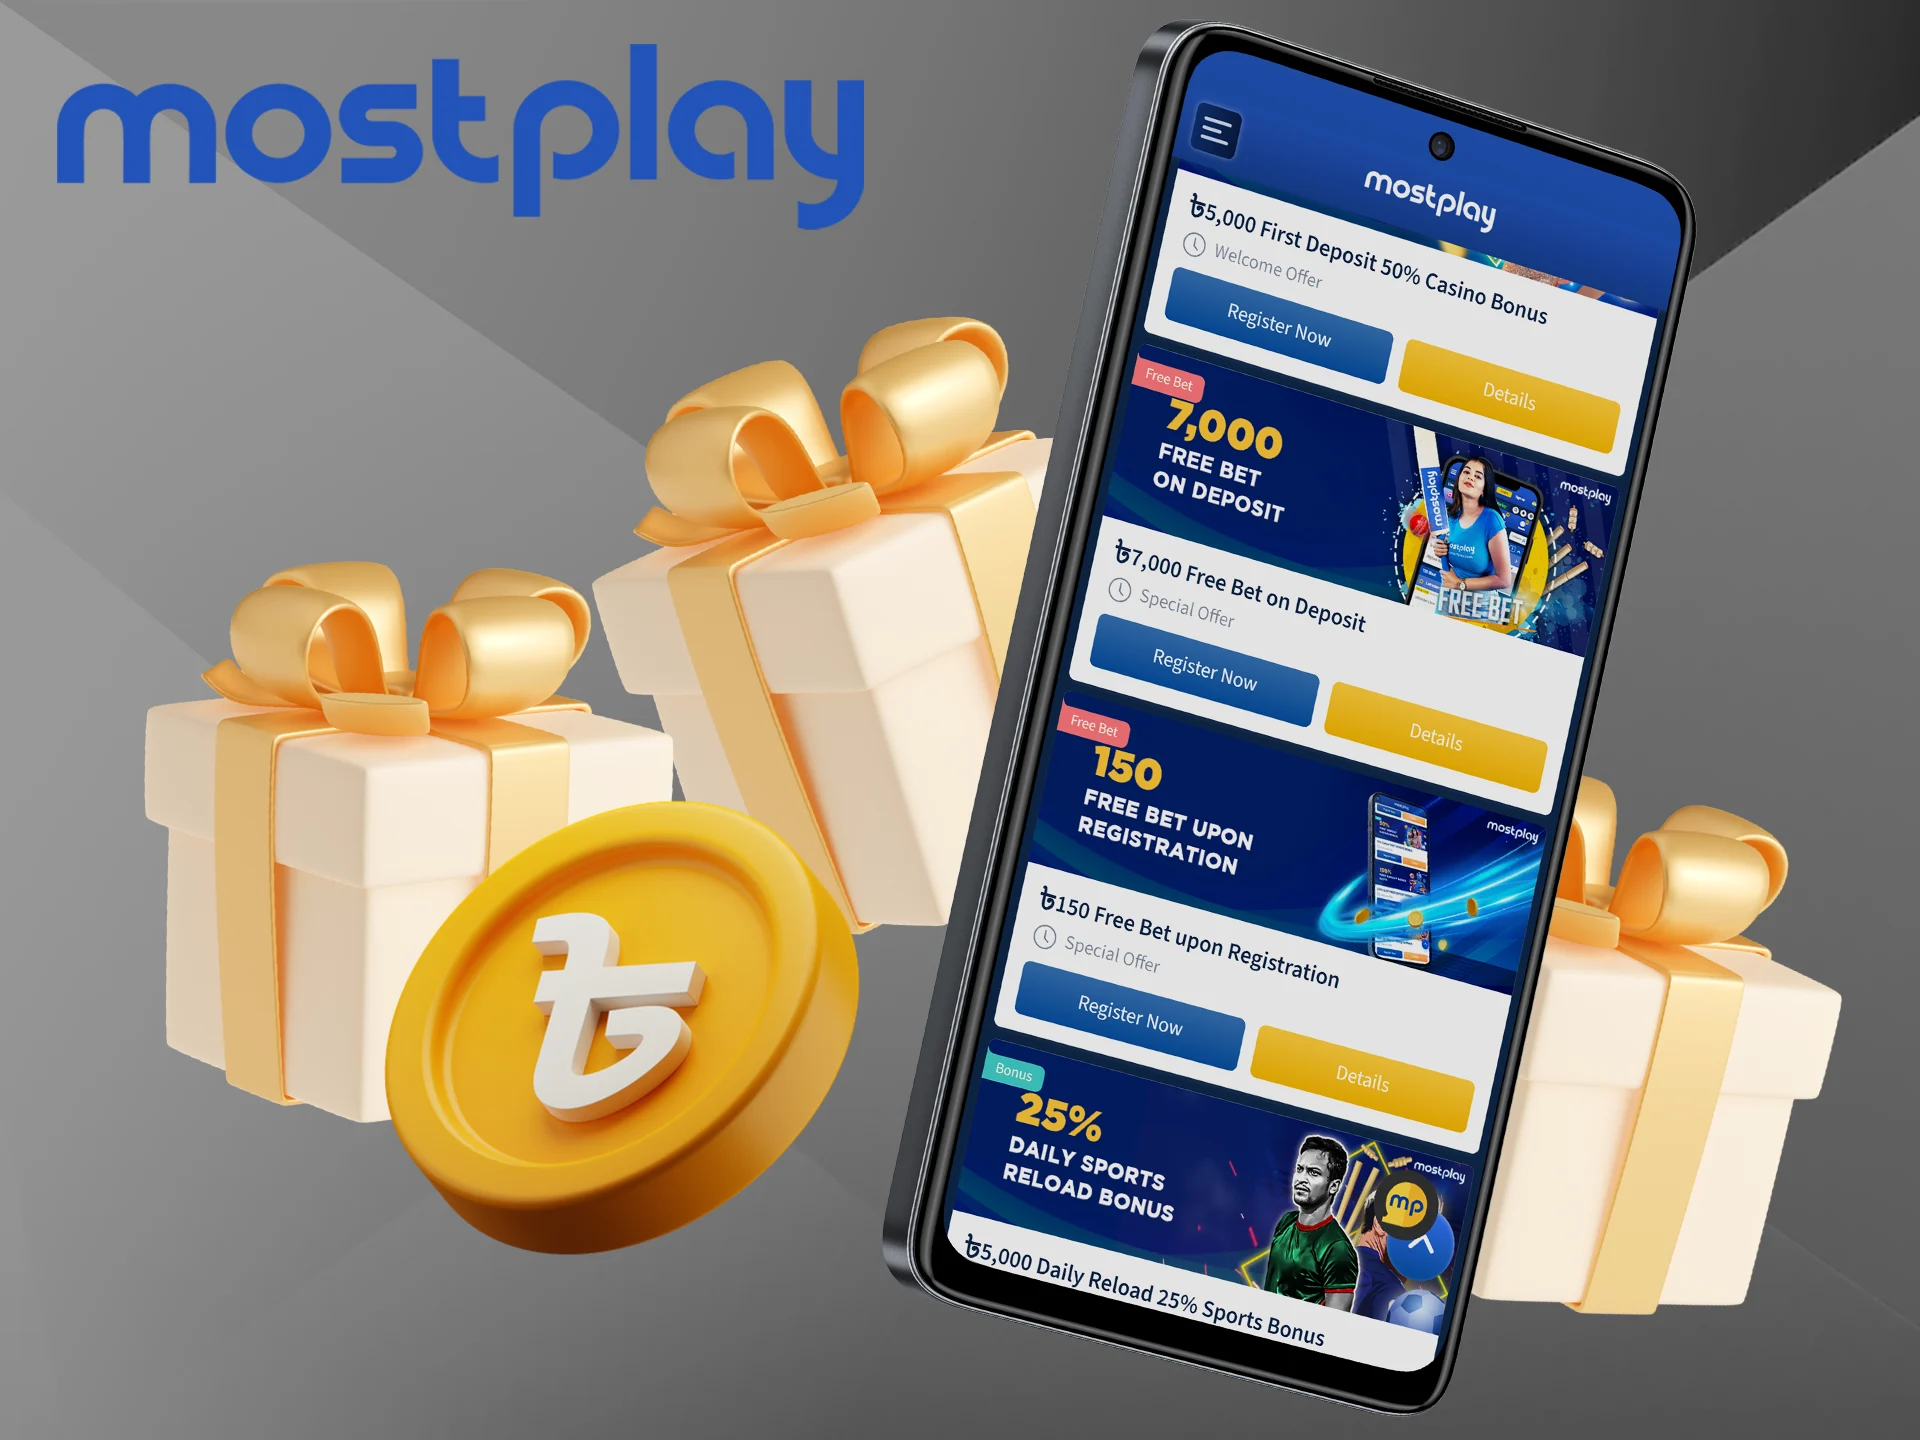 Get the Mostplay welcome bonus and enjoy free cricket bets.